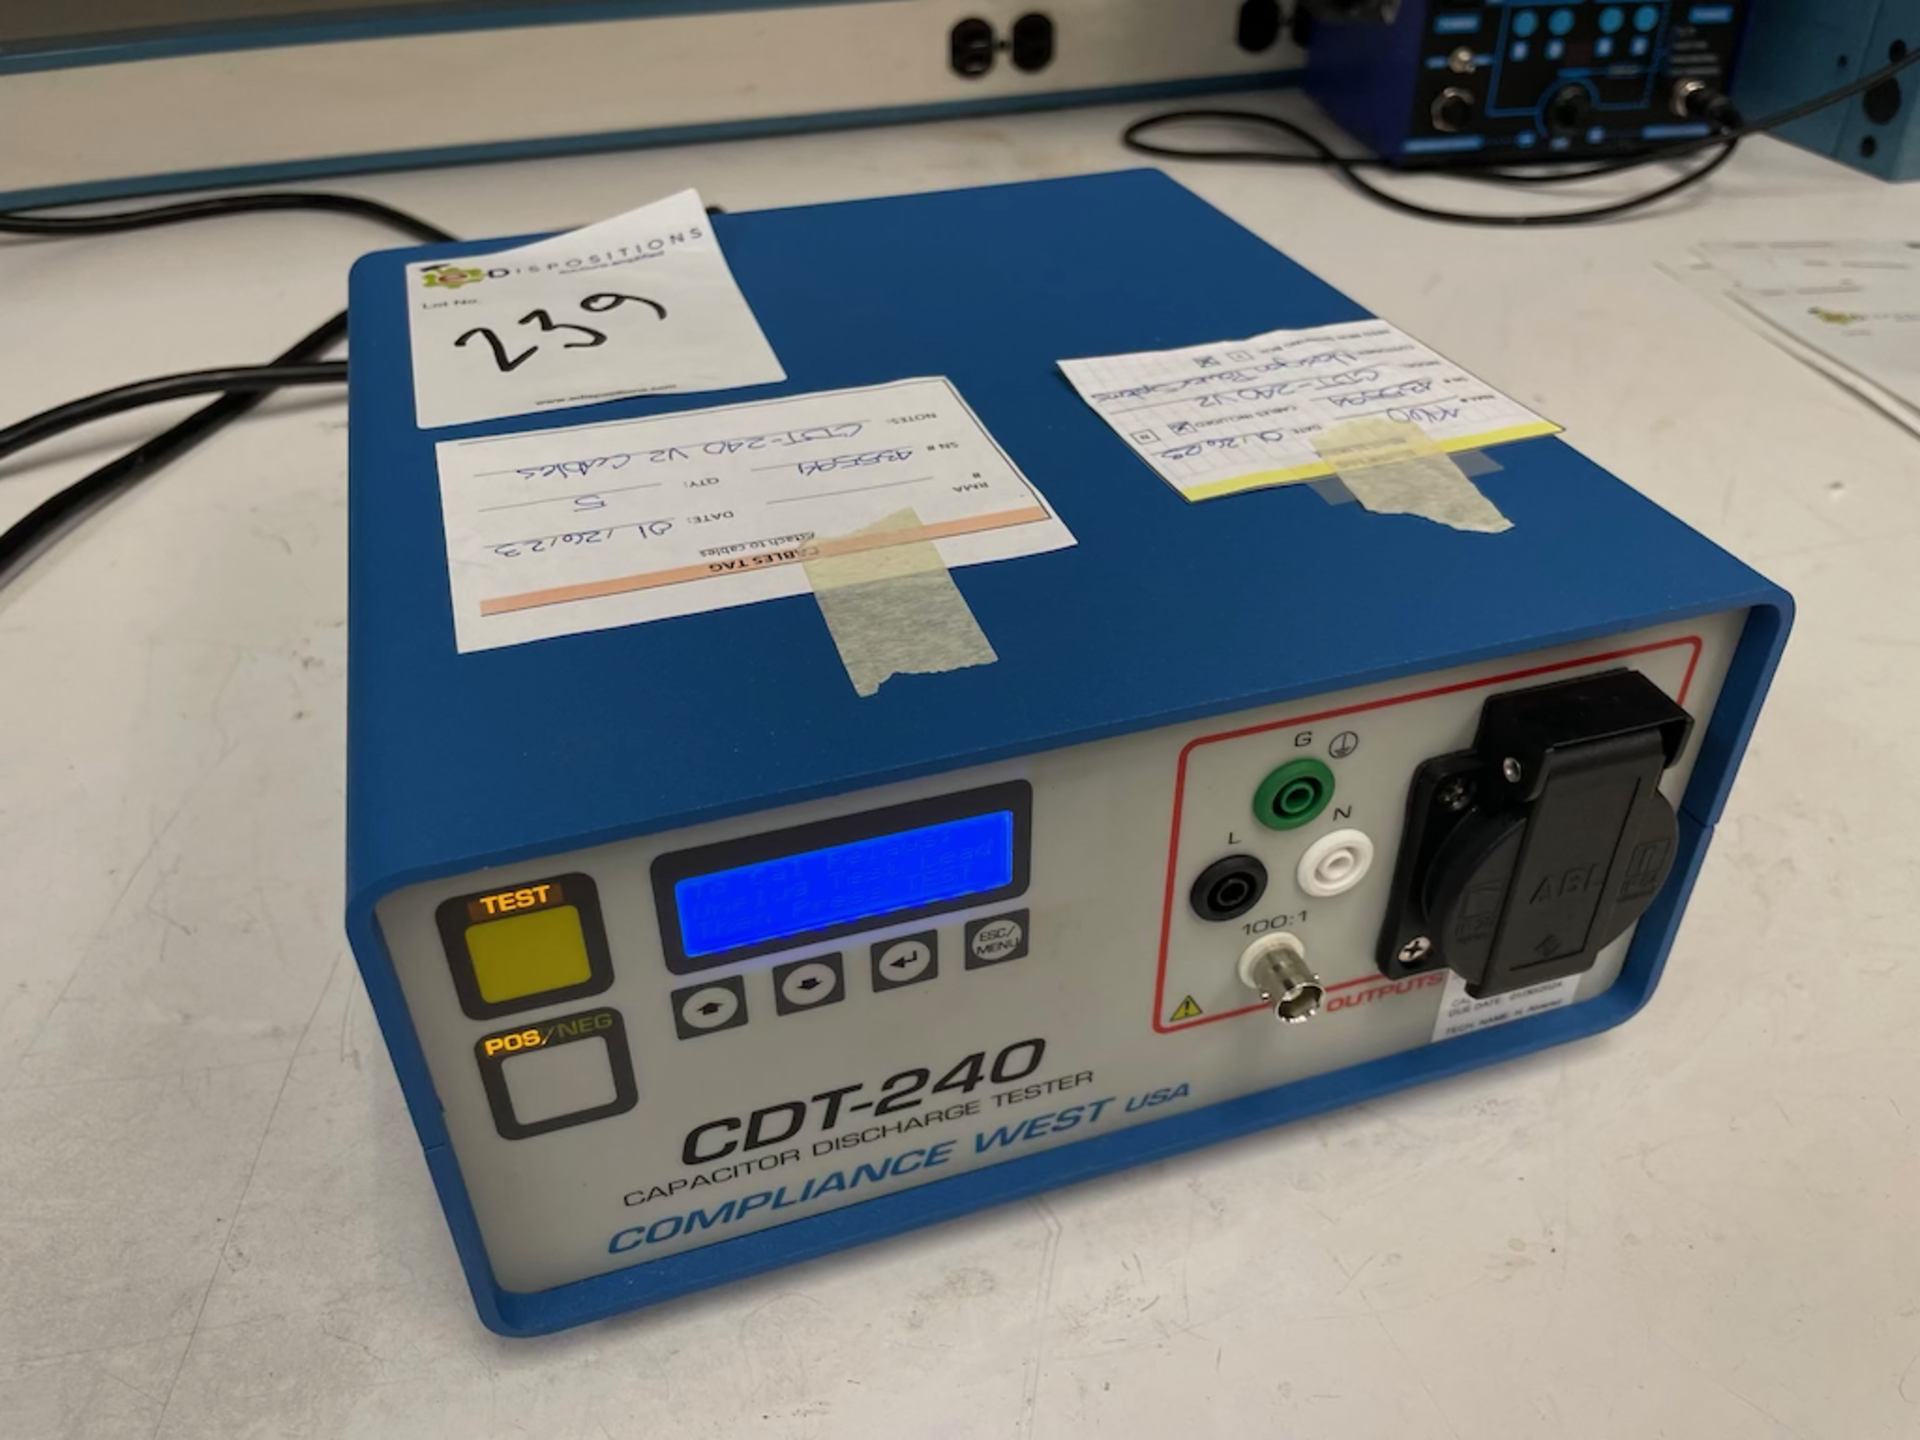 Compliance West CDT-240 Capacitor Discharge Tester SN/ 435594 - Located in Santa Clara, CA - Image 4 of 5